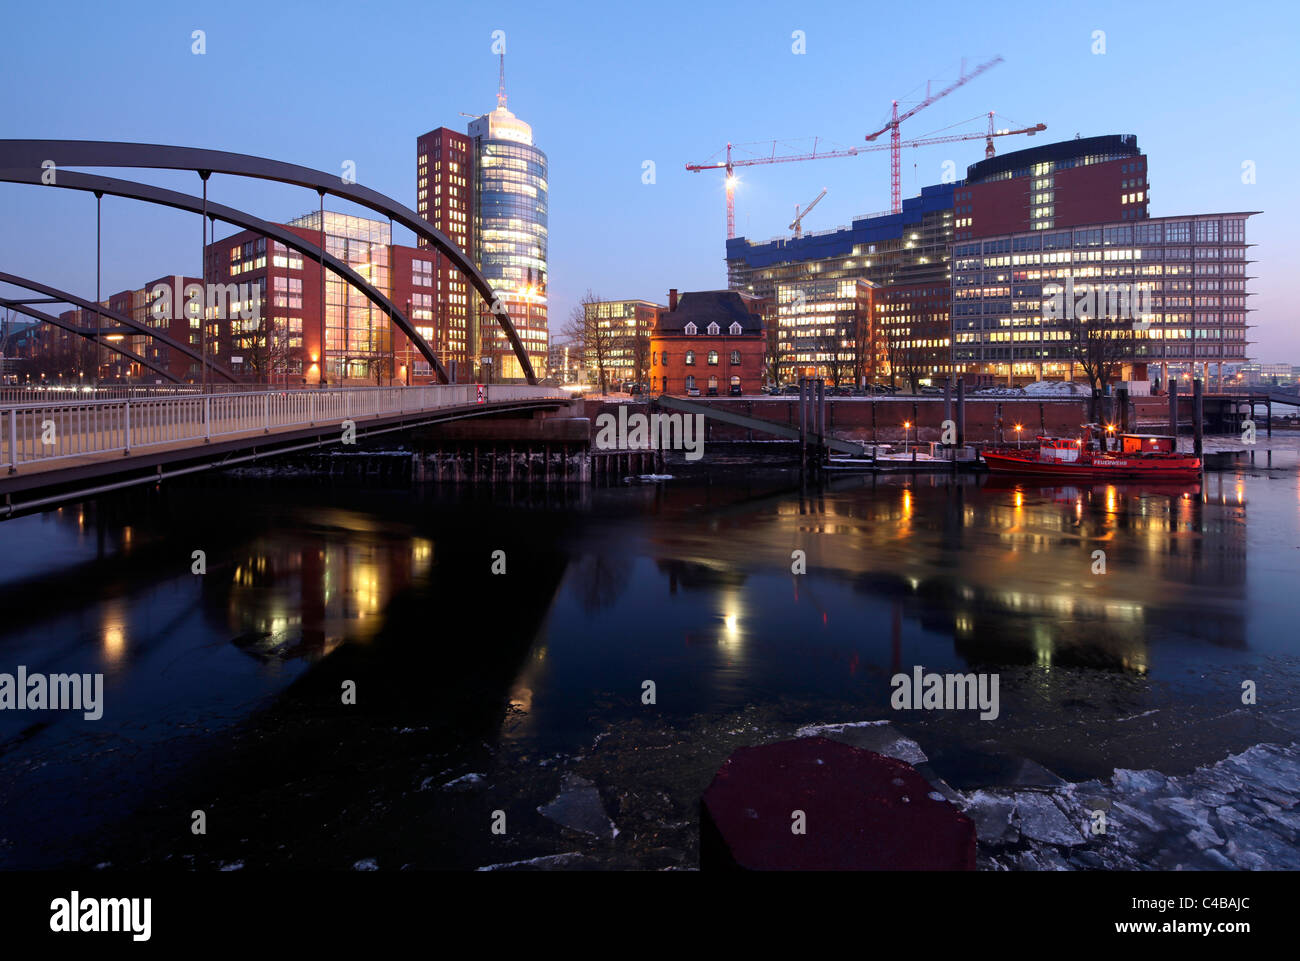 The Hanseatic Trade Center in Hamburg is a modern office building in the borough Speicherstadt, Germany Stock Photo